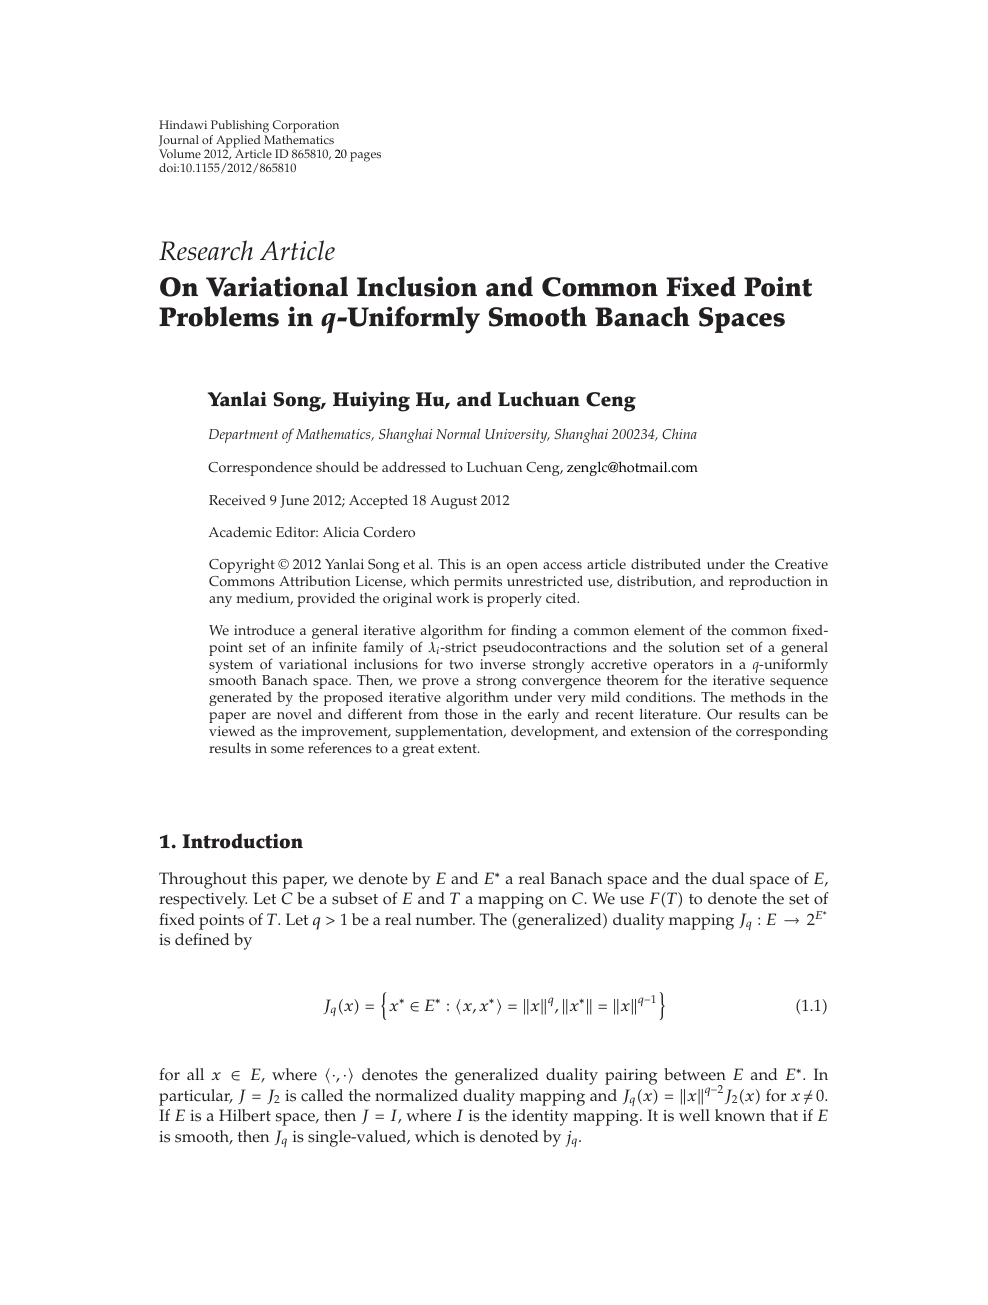 On Variational Inclusion And Common Fixed Point Problems In Q Uniformly Smooth Banach Spaces Topic Of Research Paper In Mathematics Download Scholarly Article Pdf And Read For Free On Cyberleninka Open